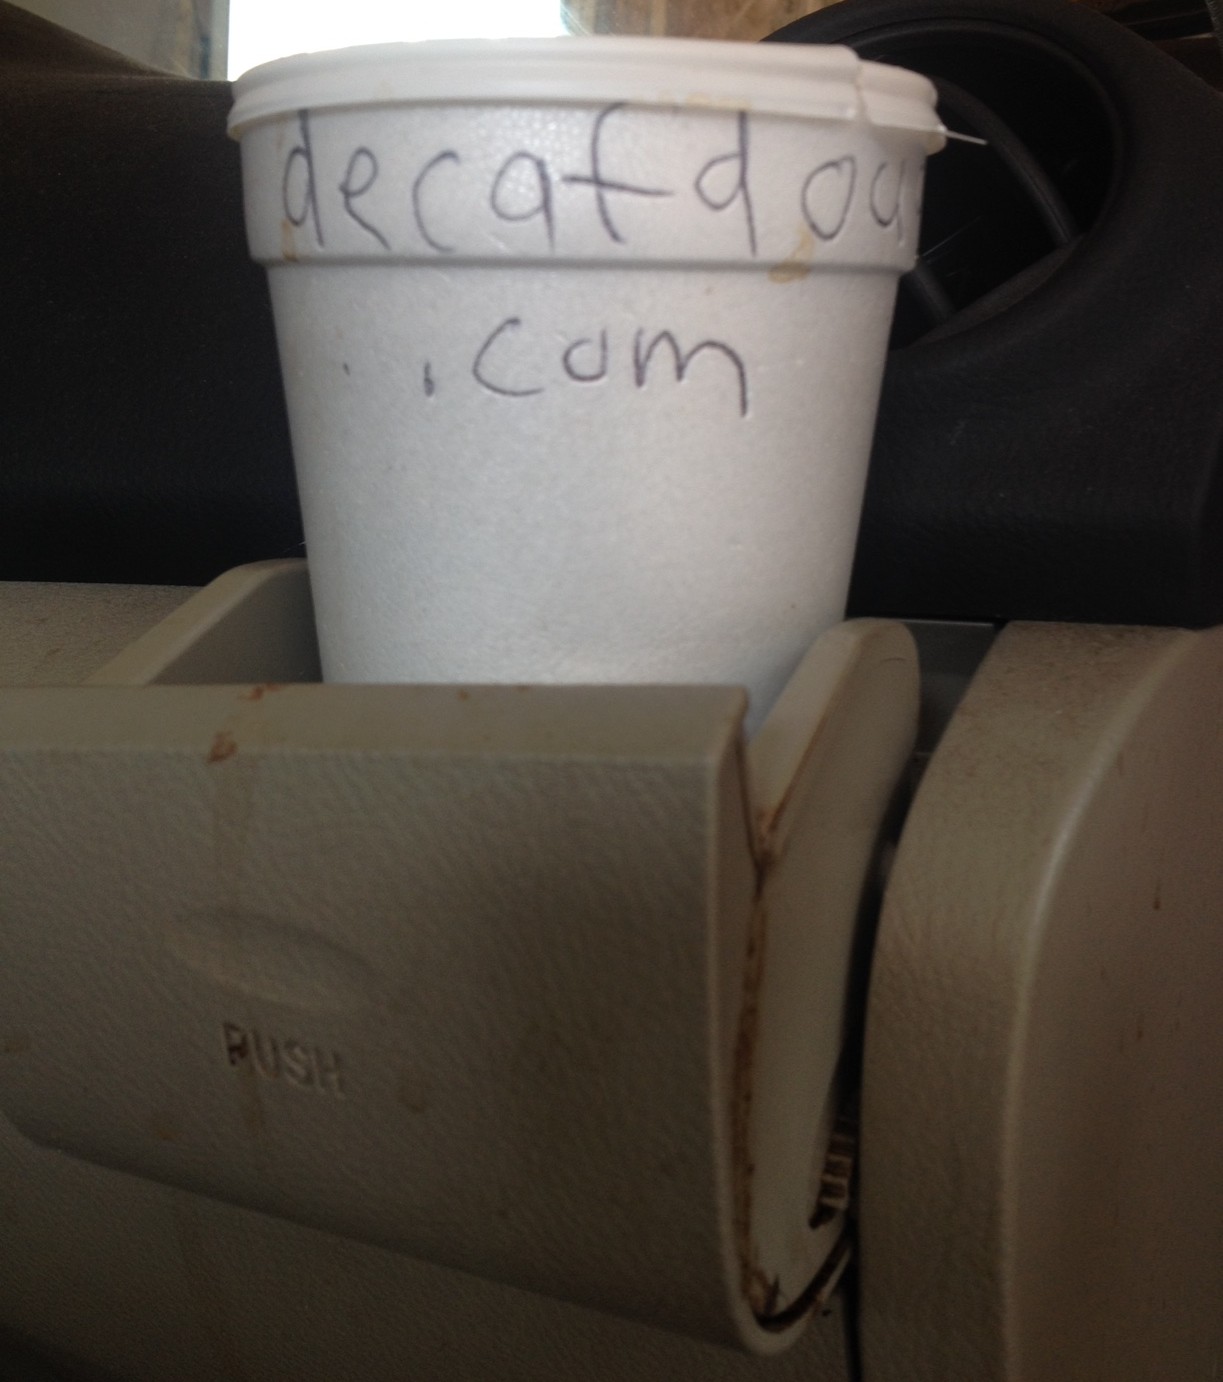 Photo showing an official Decaf Doug styrofoam cup in a car's cup-holder